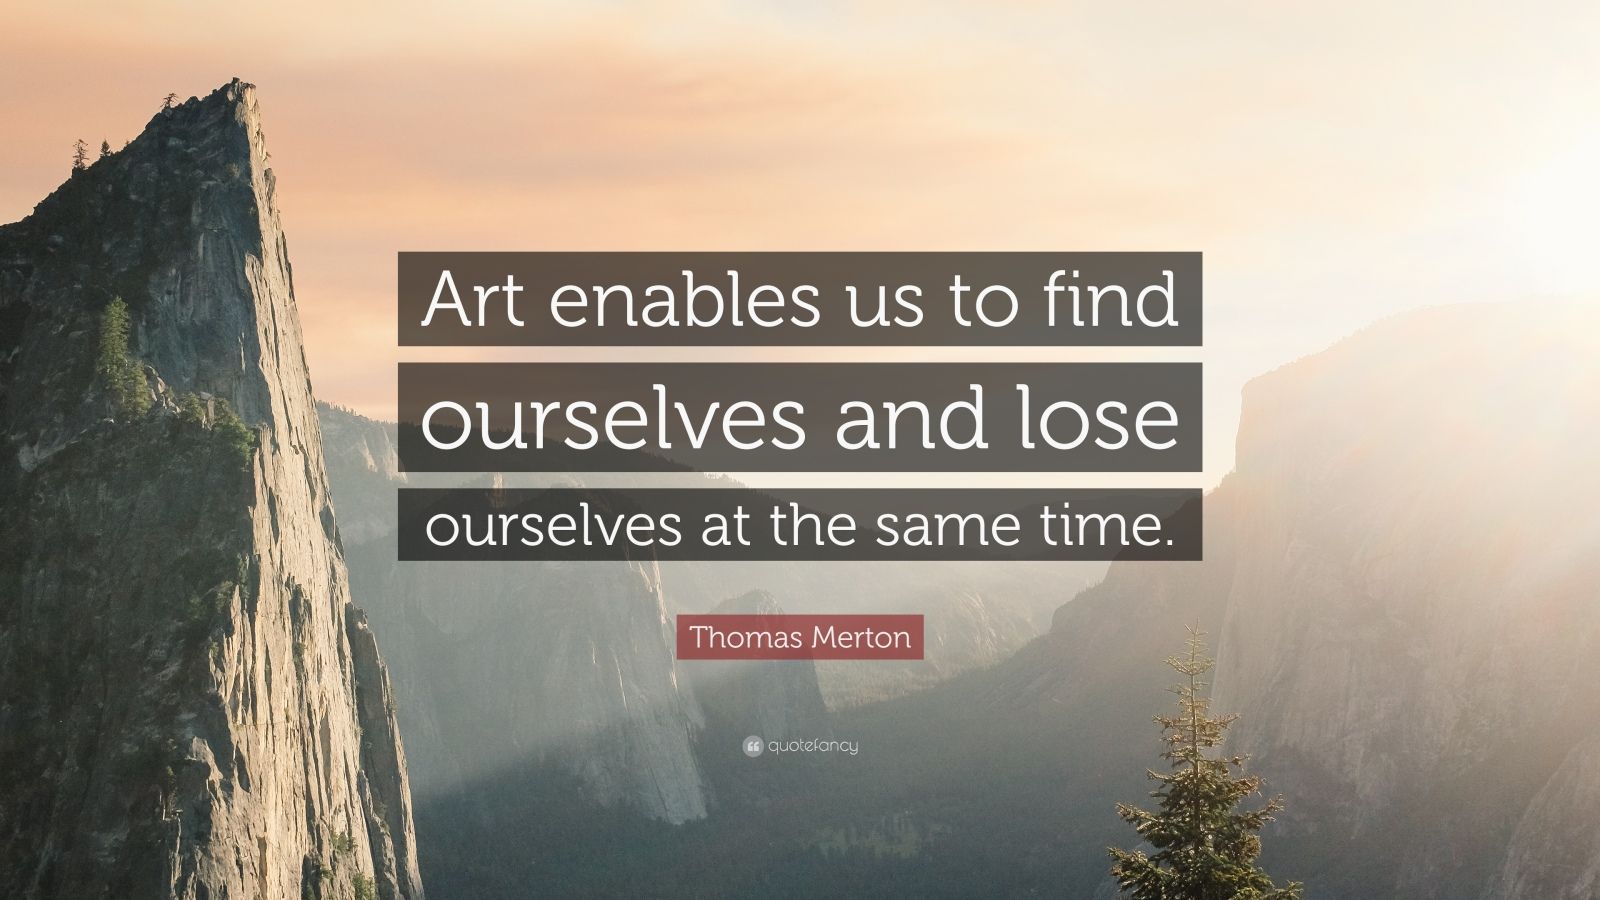 10897 Thomas Merton Quote Art enables us to find ourselves and lose